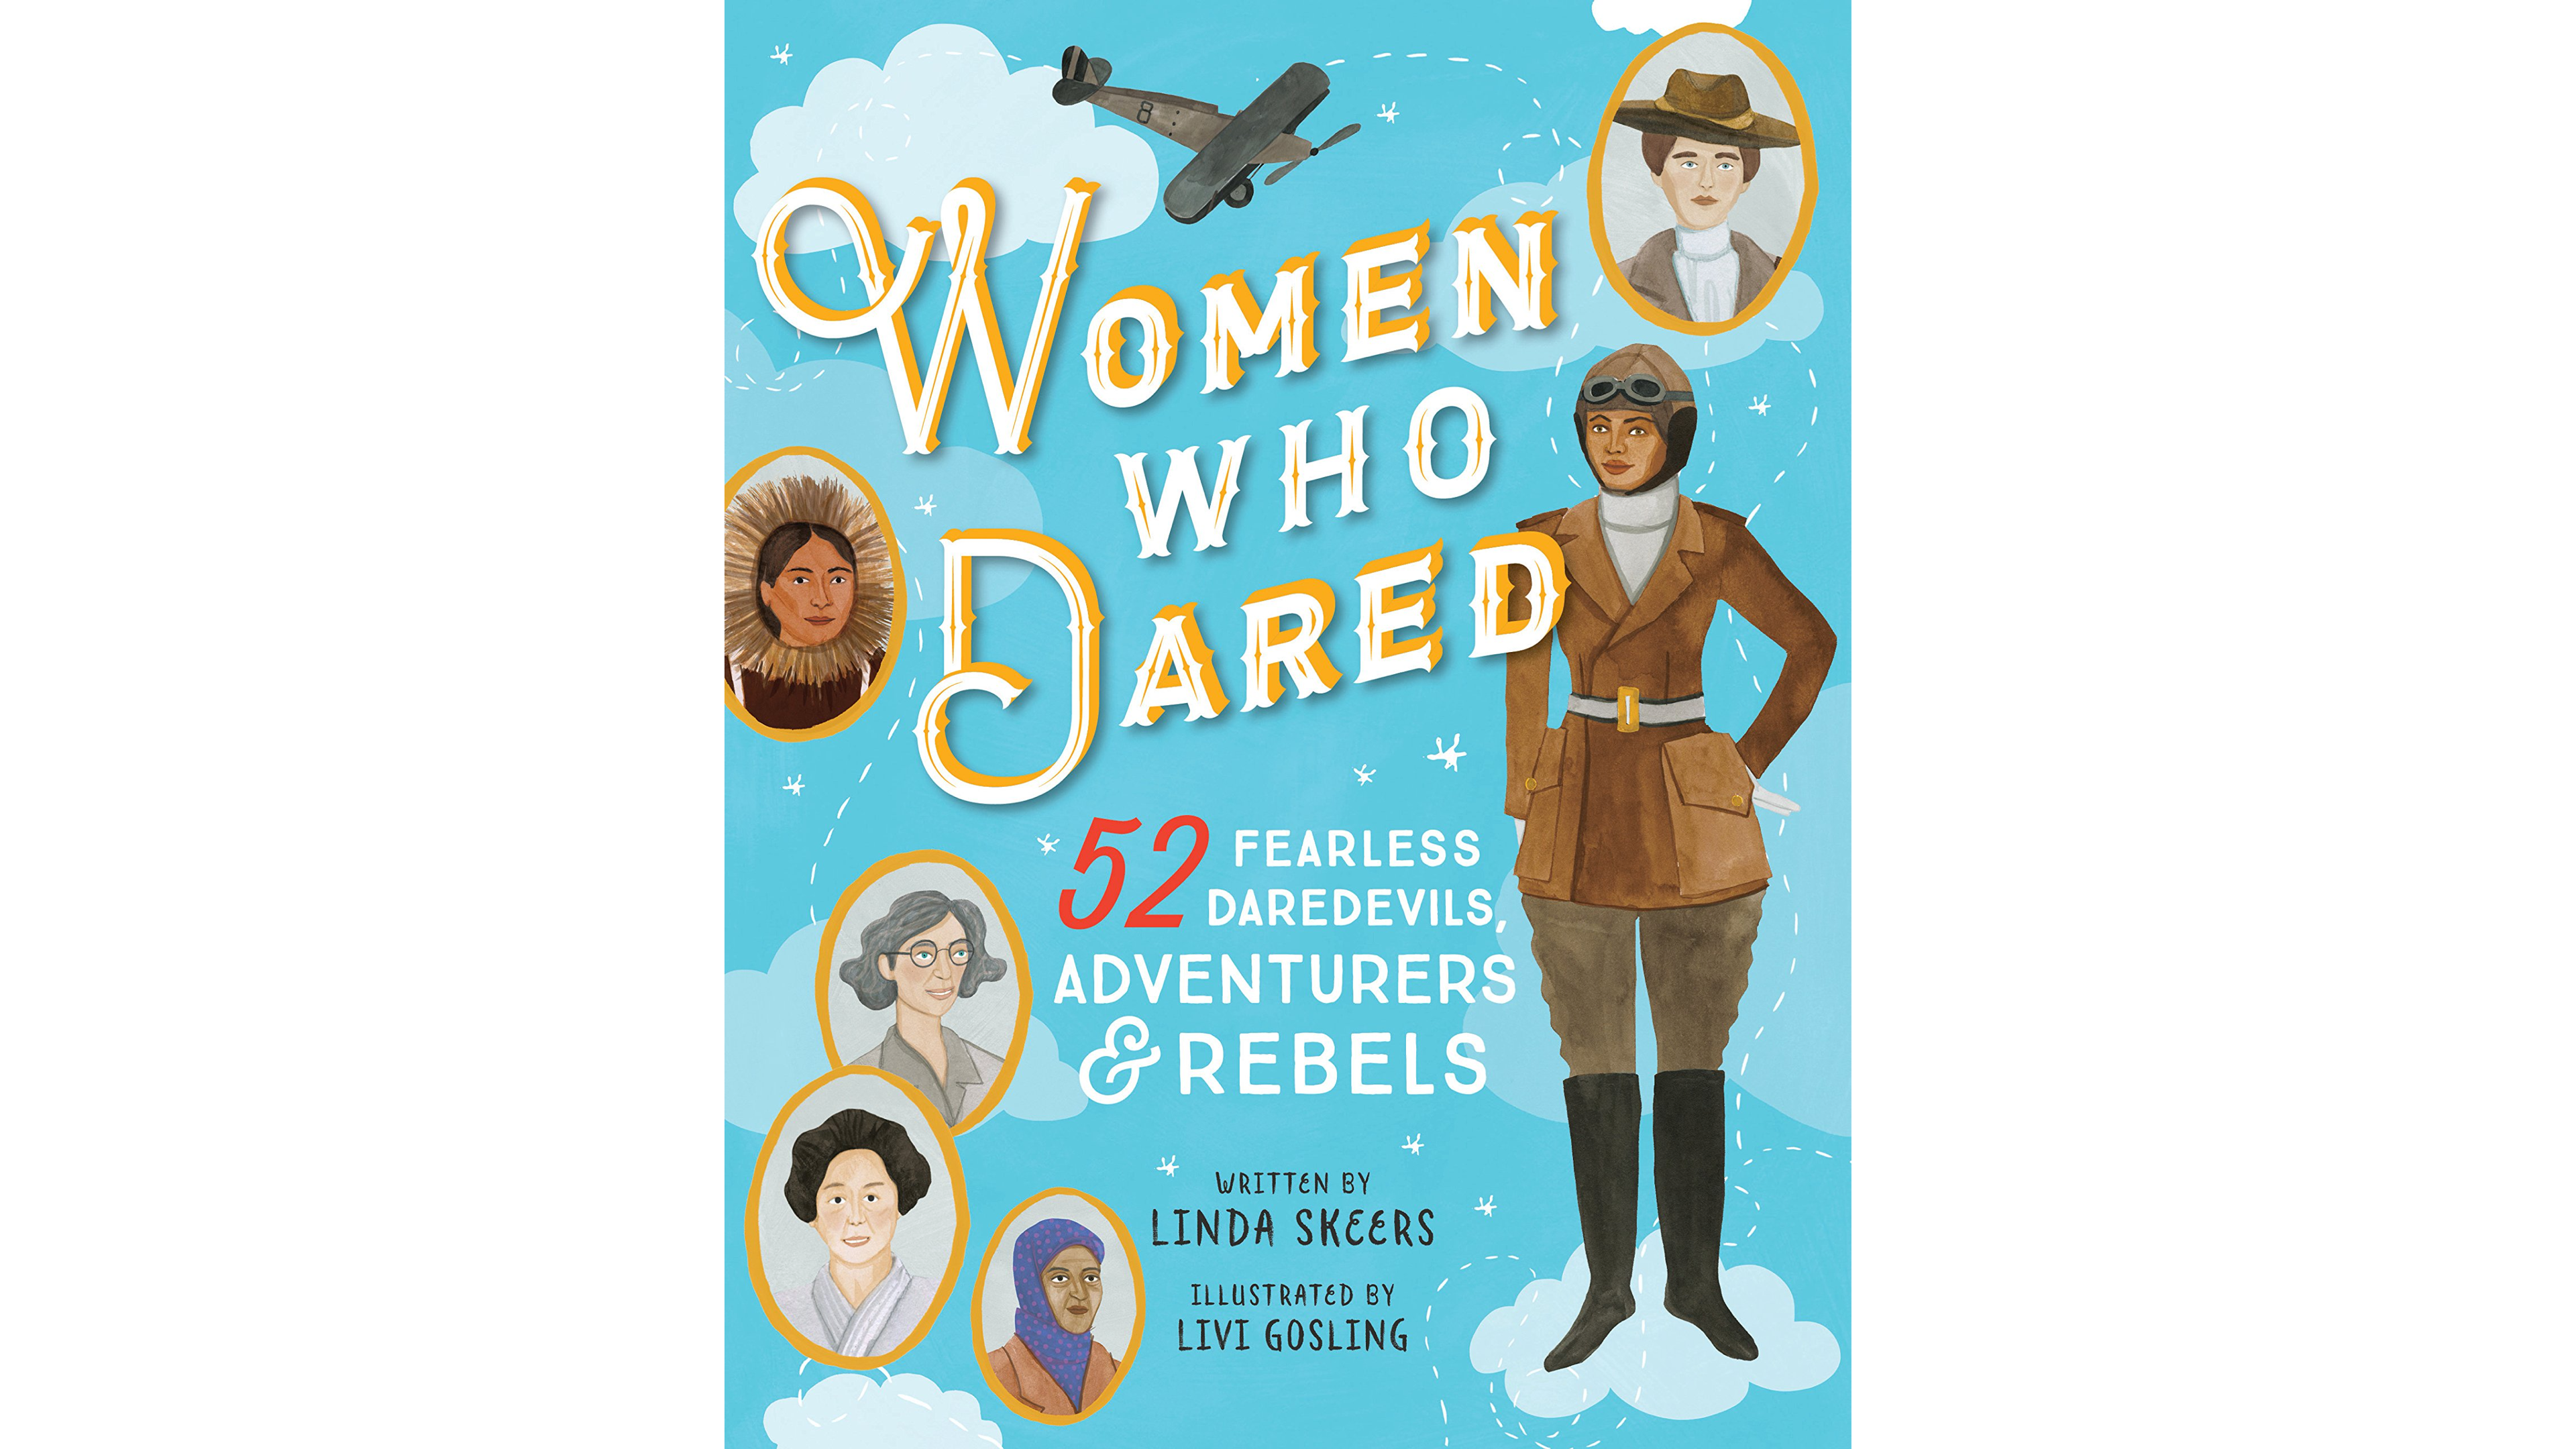 kid's book all about famous women in history who accomplished great things